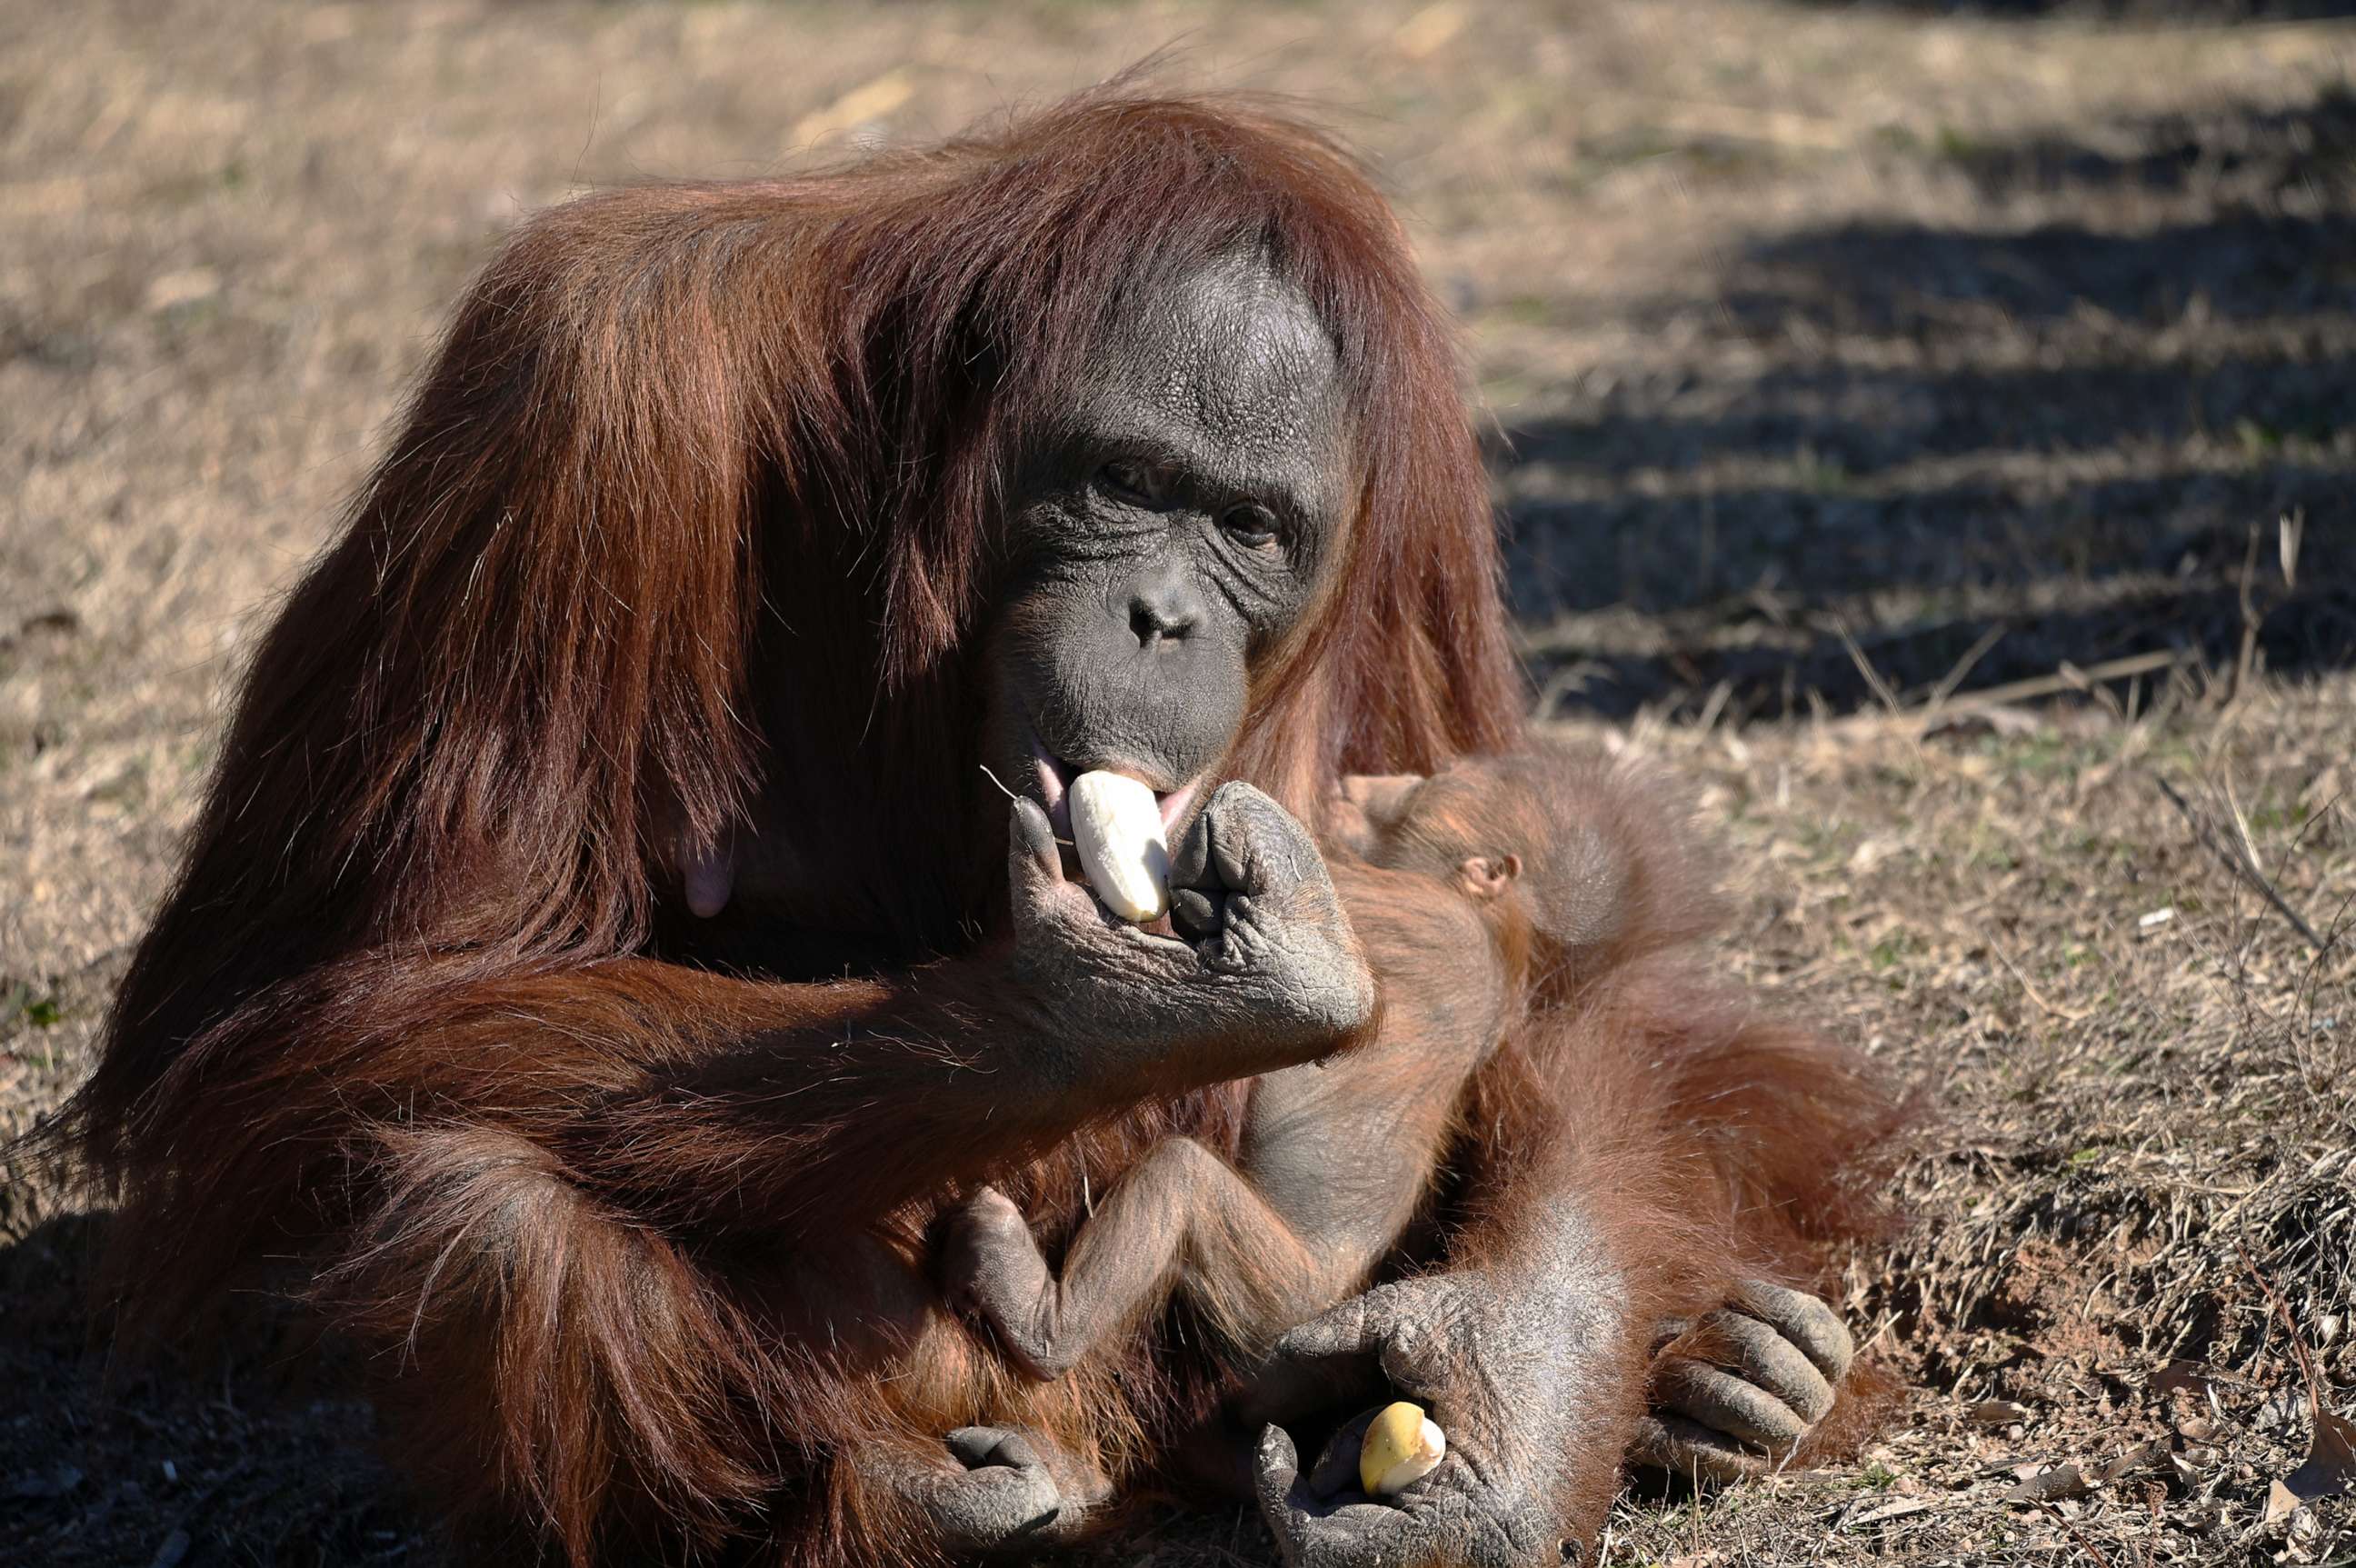 PHOTO: Zoe, an orangutan at the Metro Richmond Zoo, had to be taught by zookeepers how to breastfeed her baby boy.